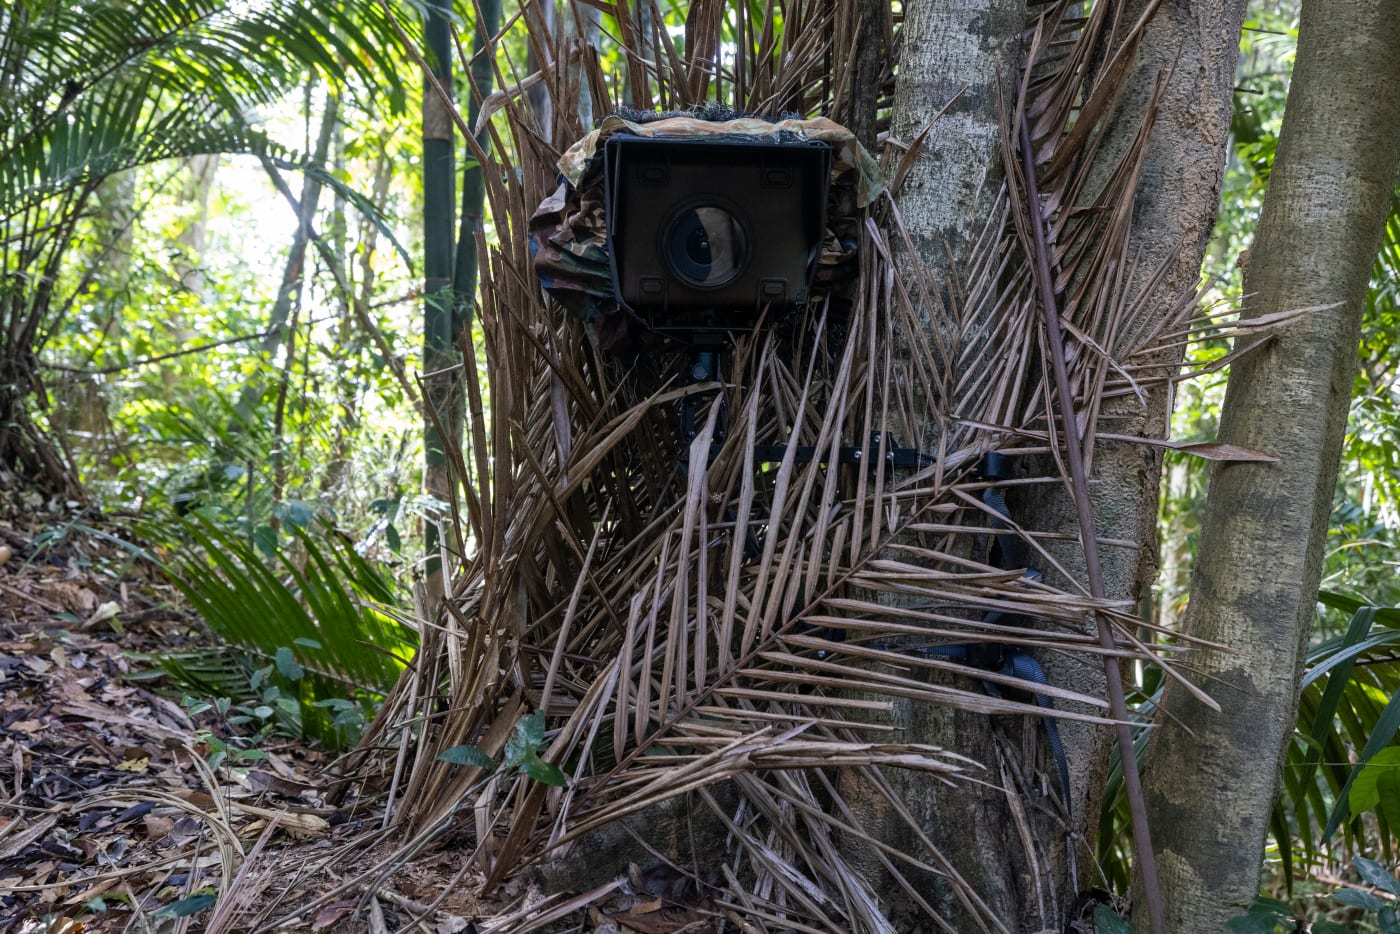 One of Photographer's Emmanuel Rondeau DSLR Camera traps installed in the forest of Belum State Park, Malaysia